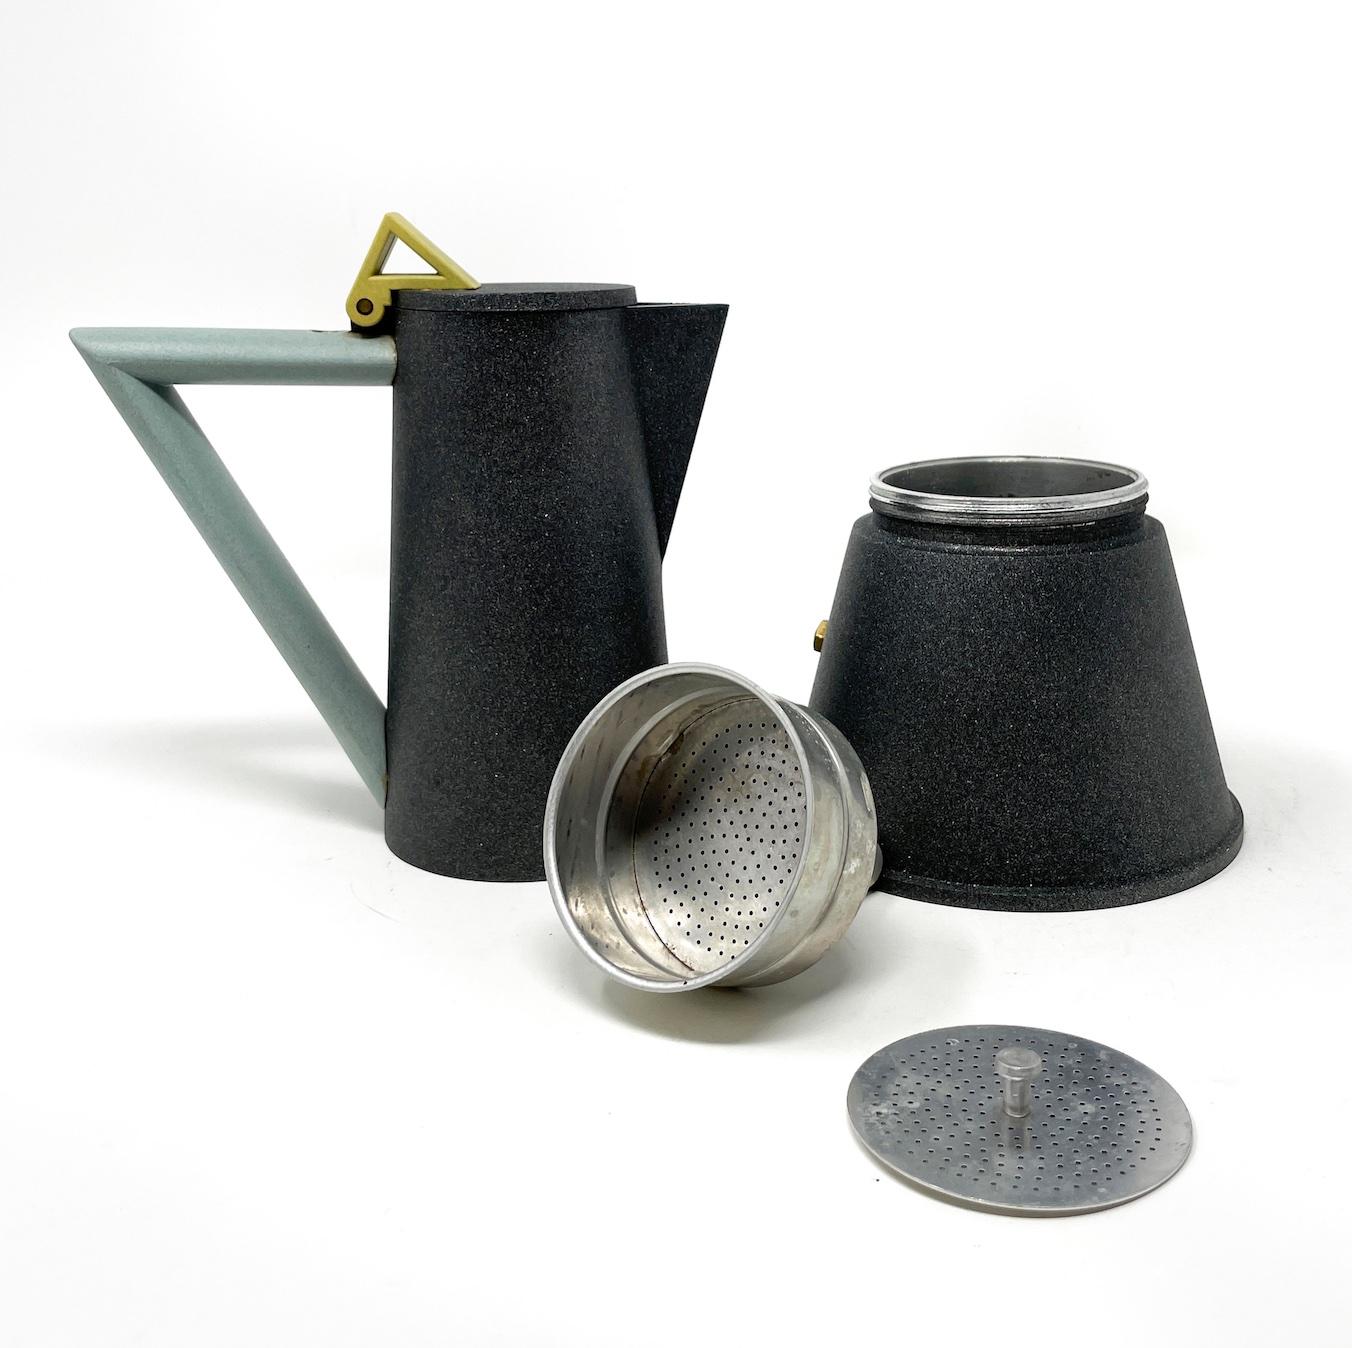 20th Century Postmodern Espresso Pot by Ettore Sottsass for Lagostina